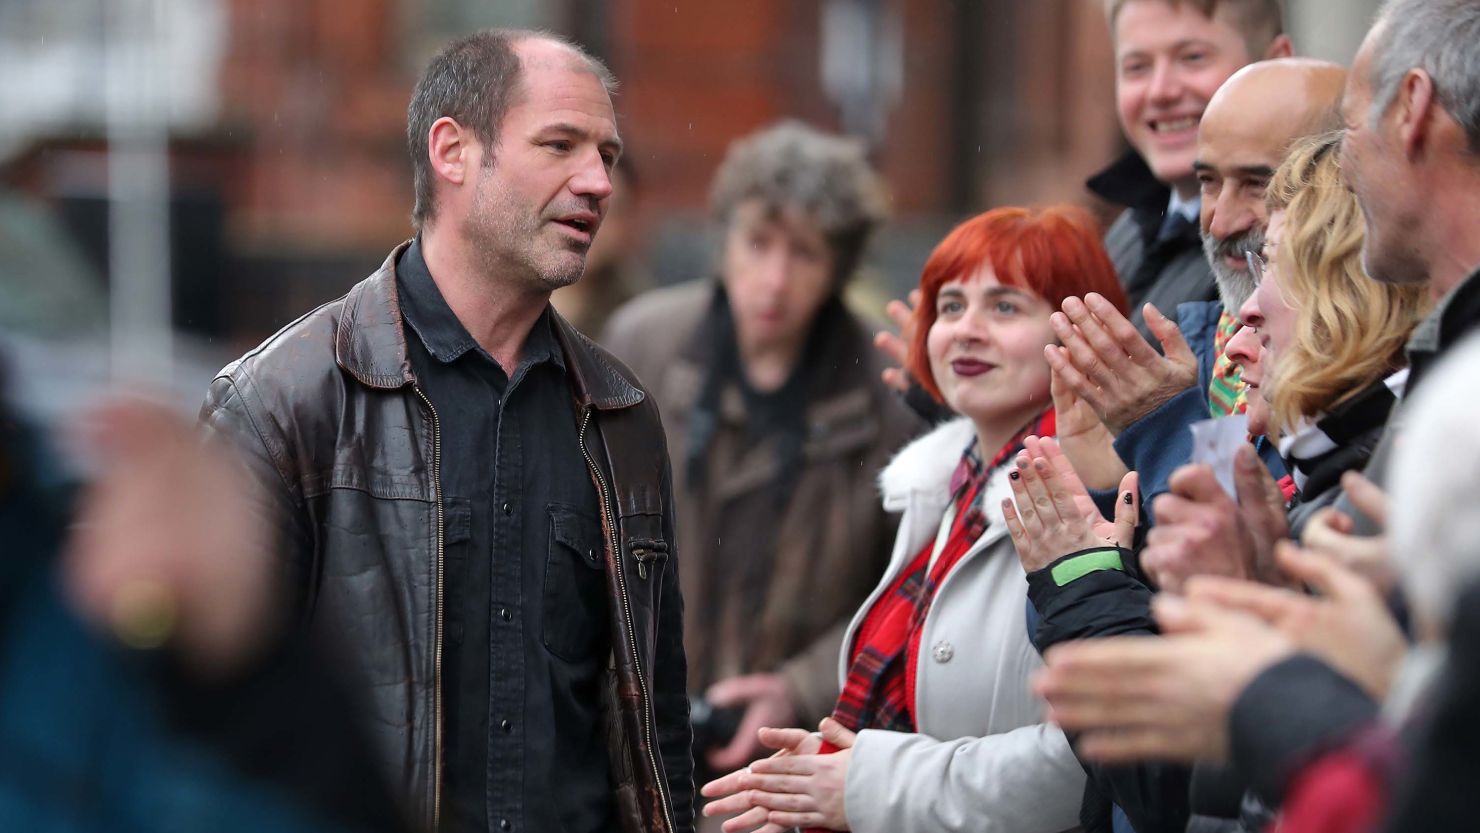 James Matthews, 43, was met by supporters as he arrived at a London court Wednesday. 